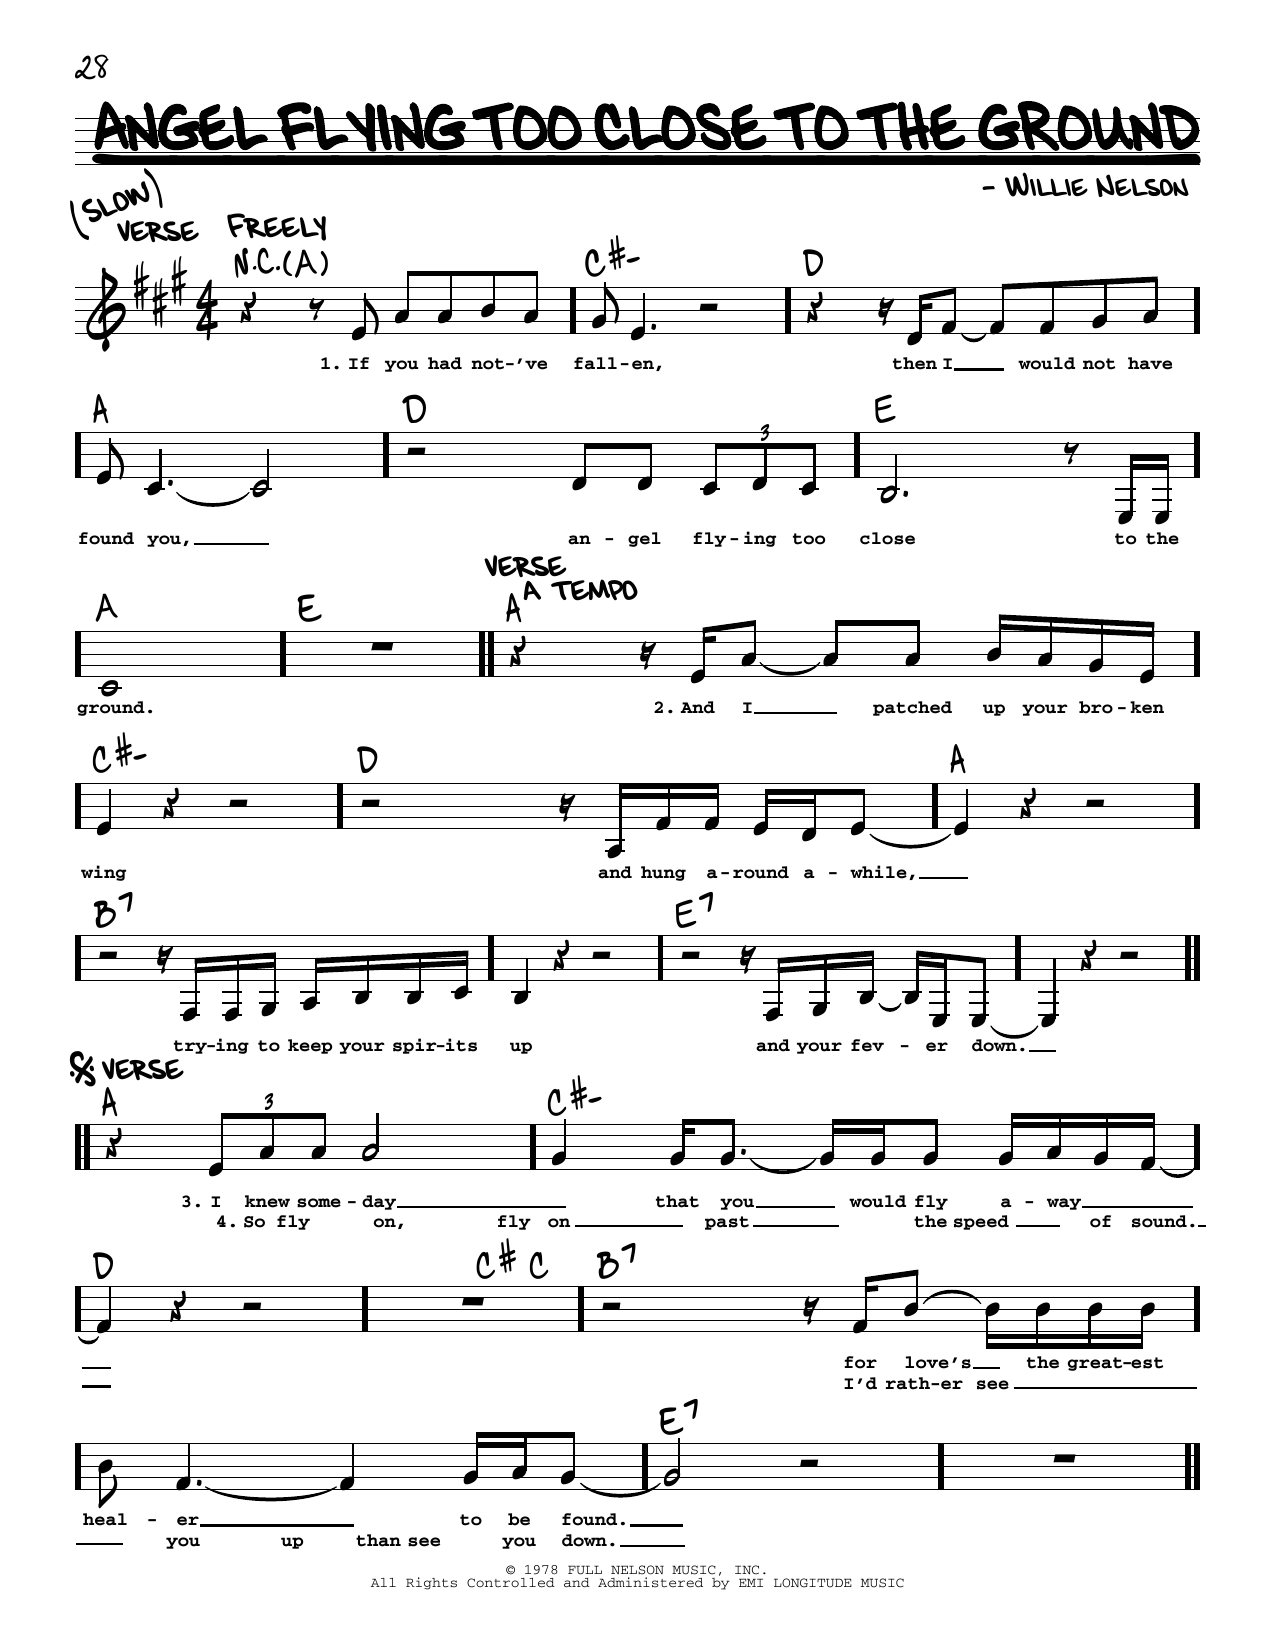 Download Willie Nelson Angel Flying Too Close To The Ground Sheet Music